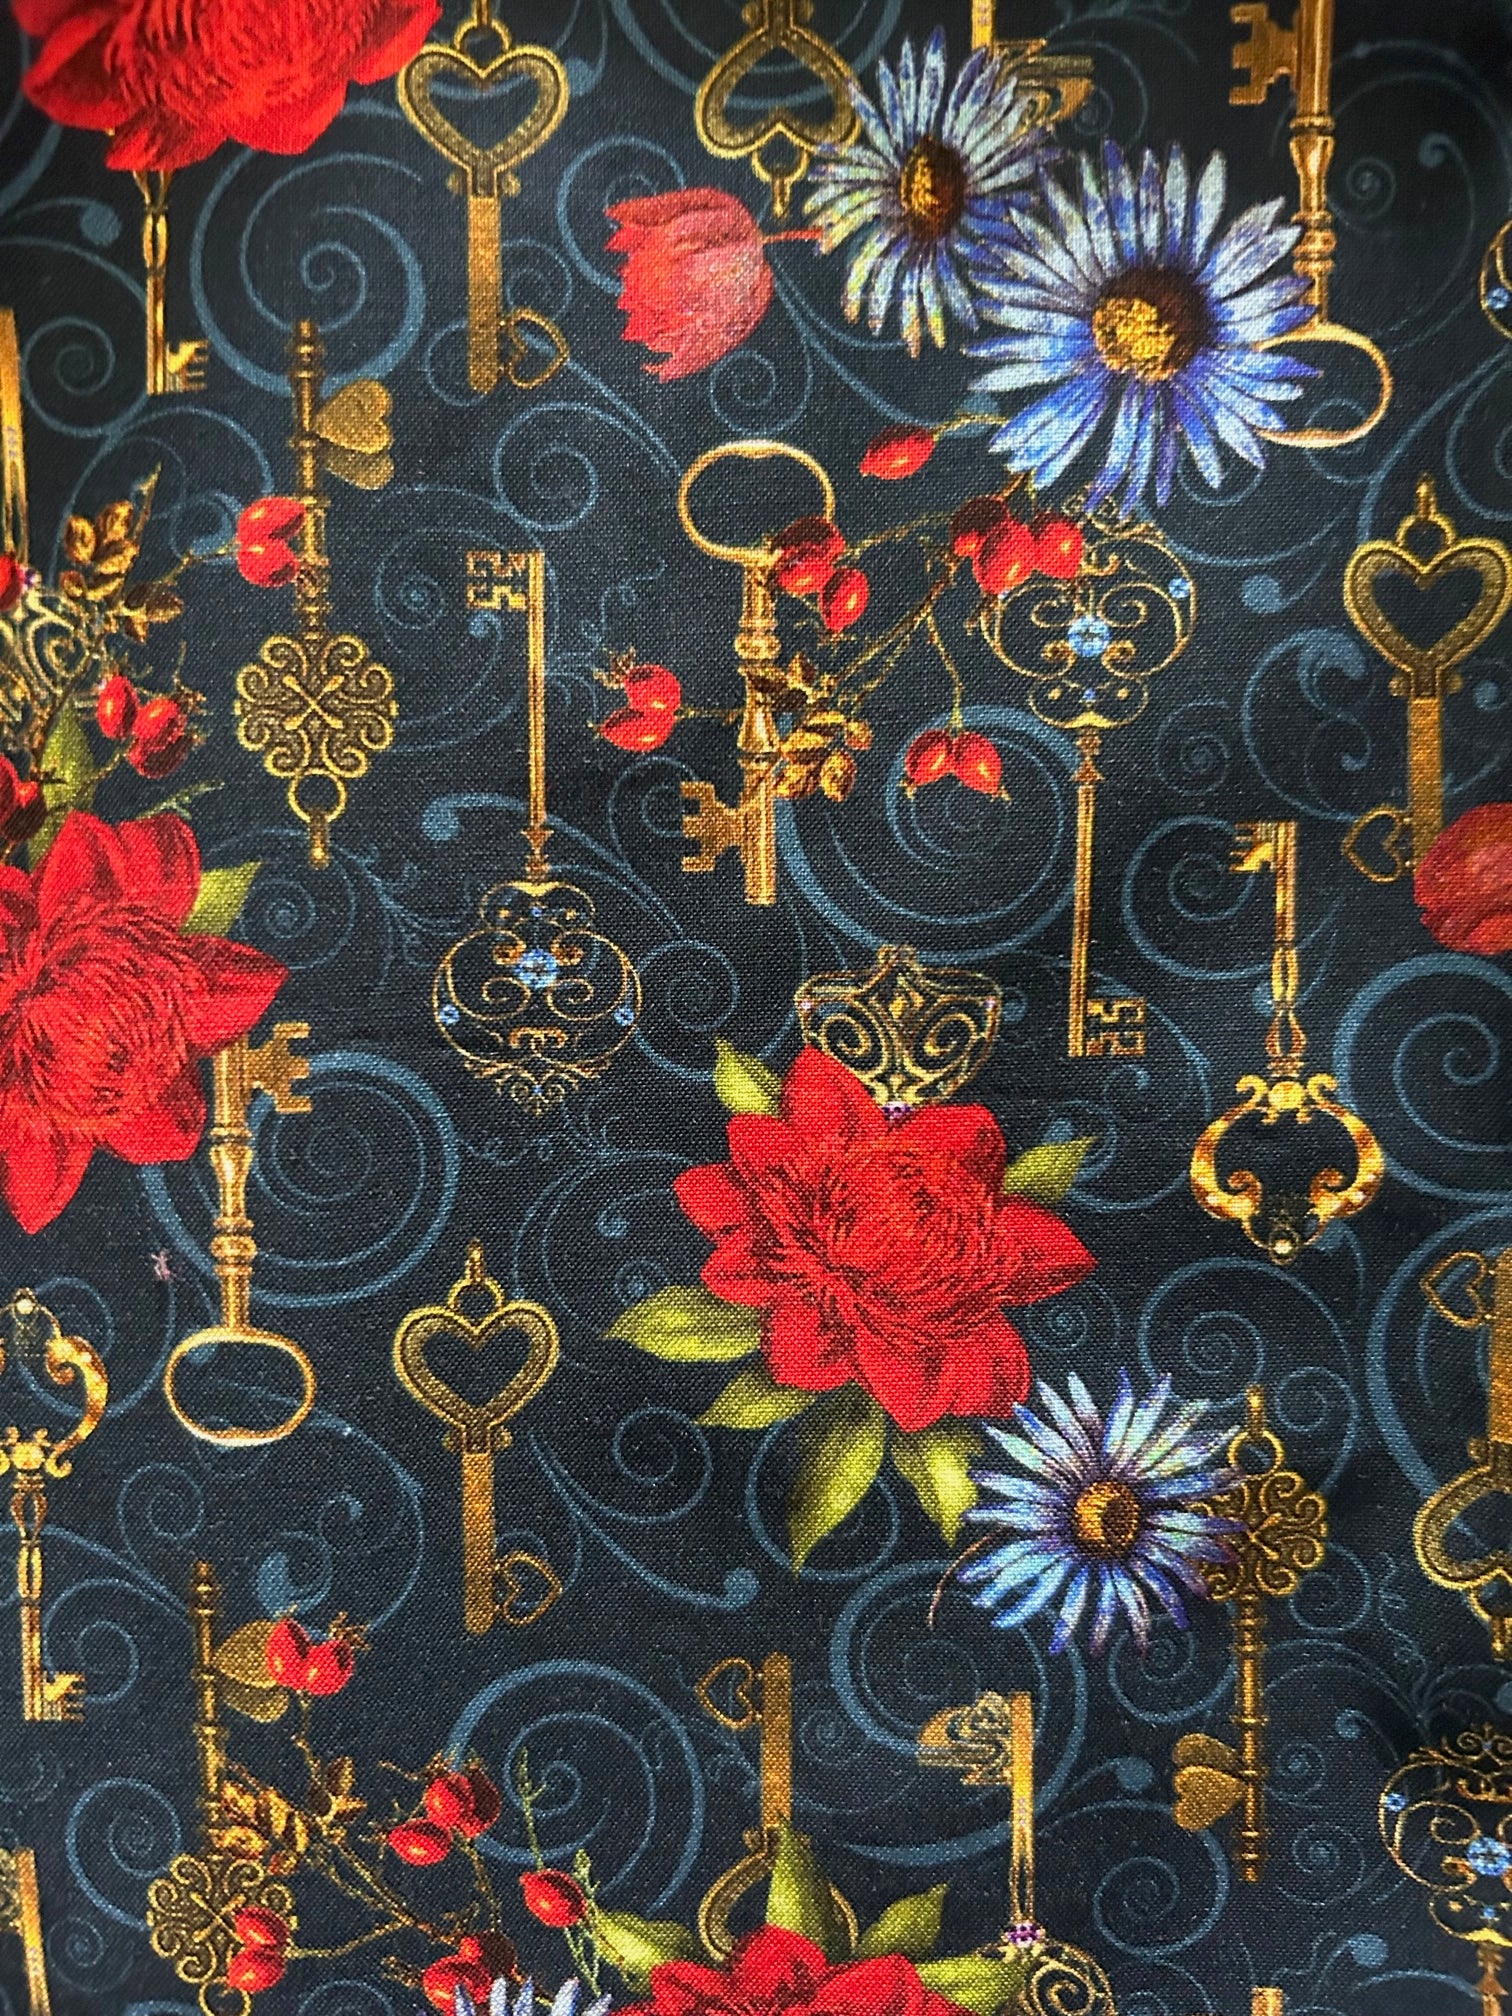 a close up of the fabric showing keys and flowers